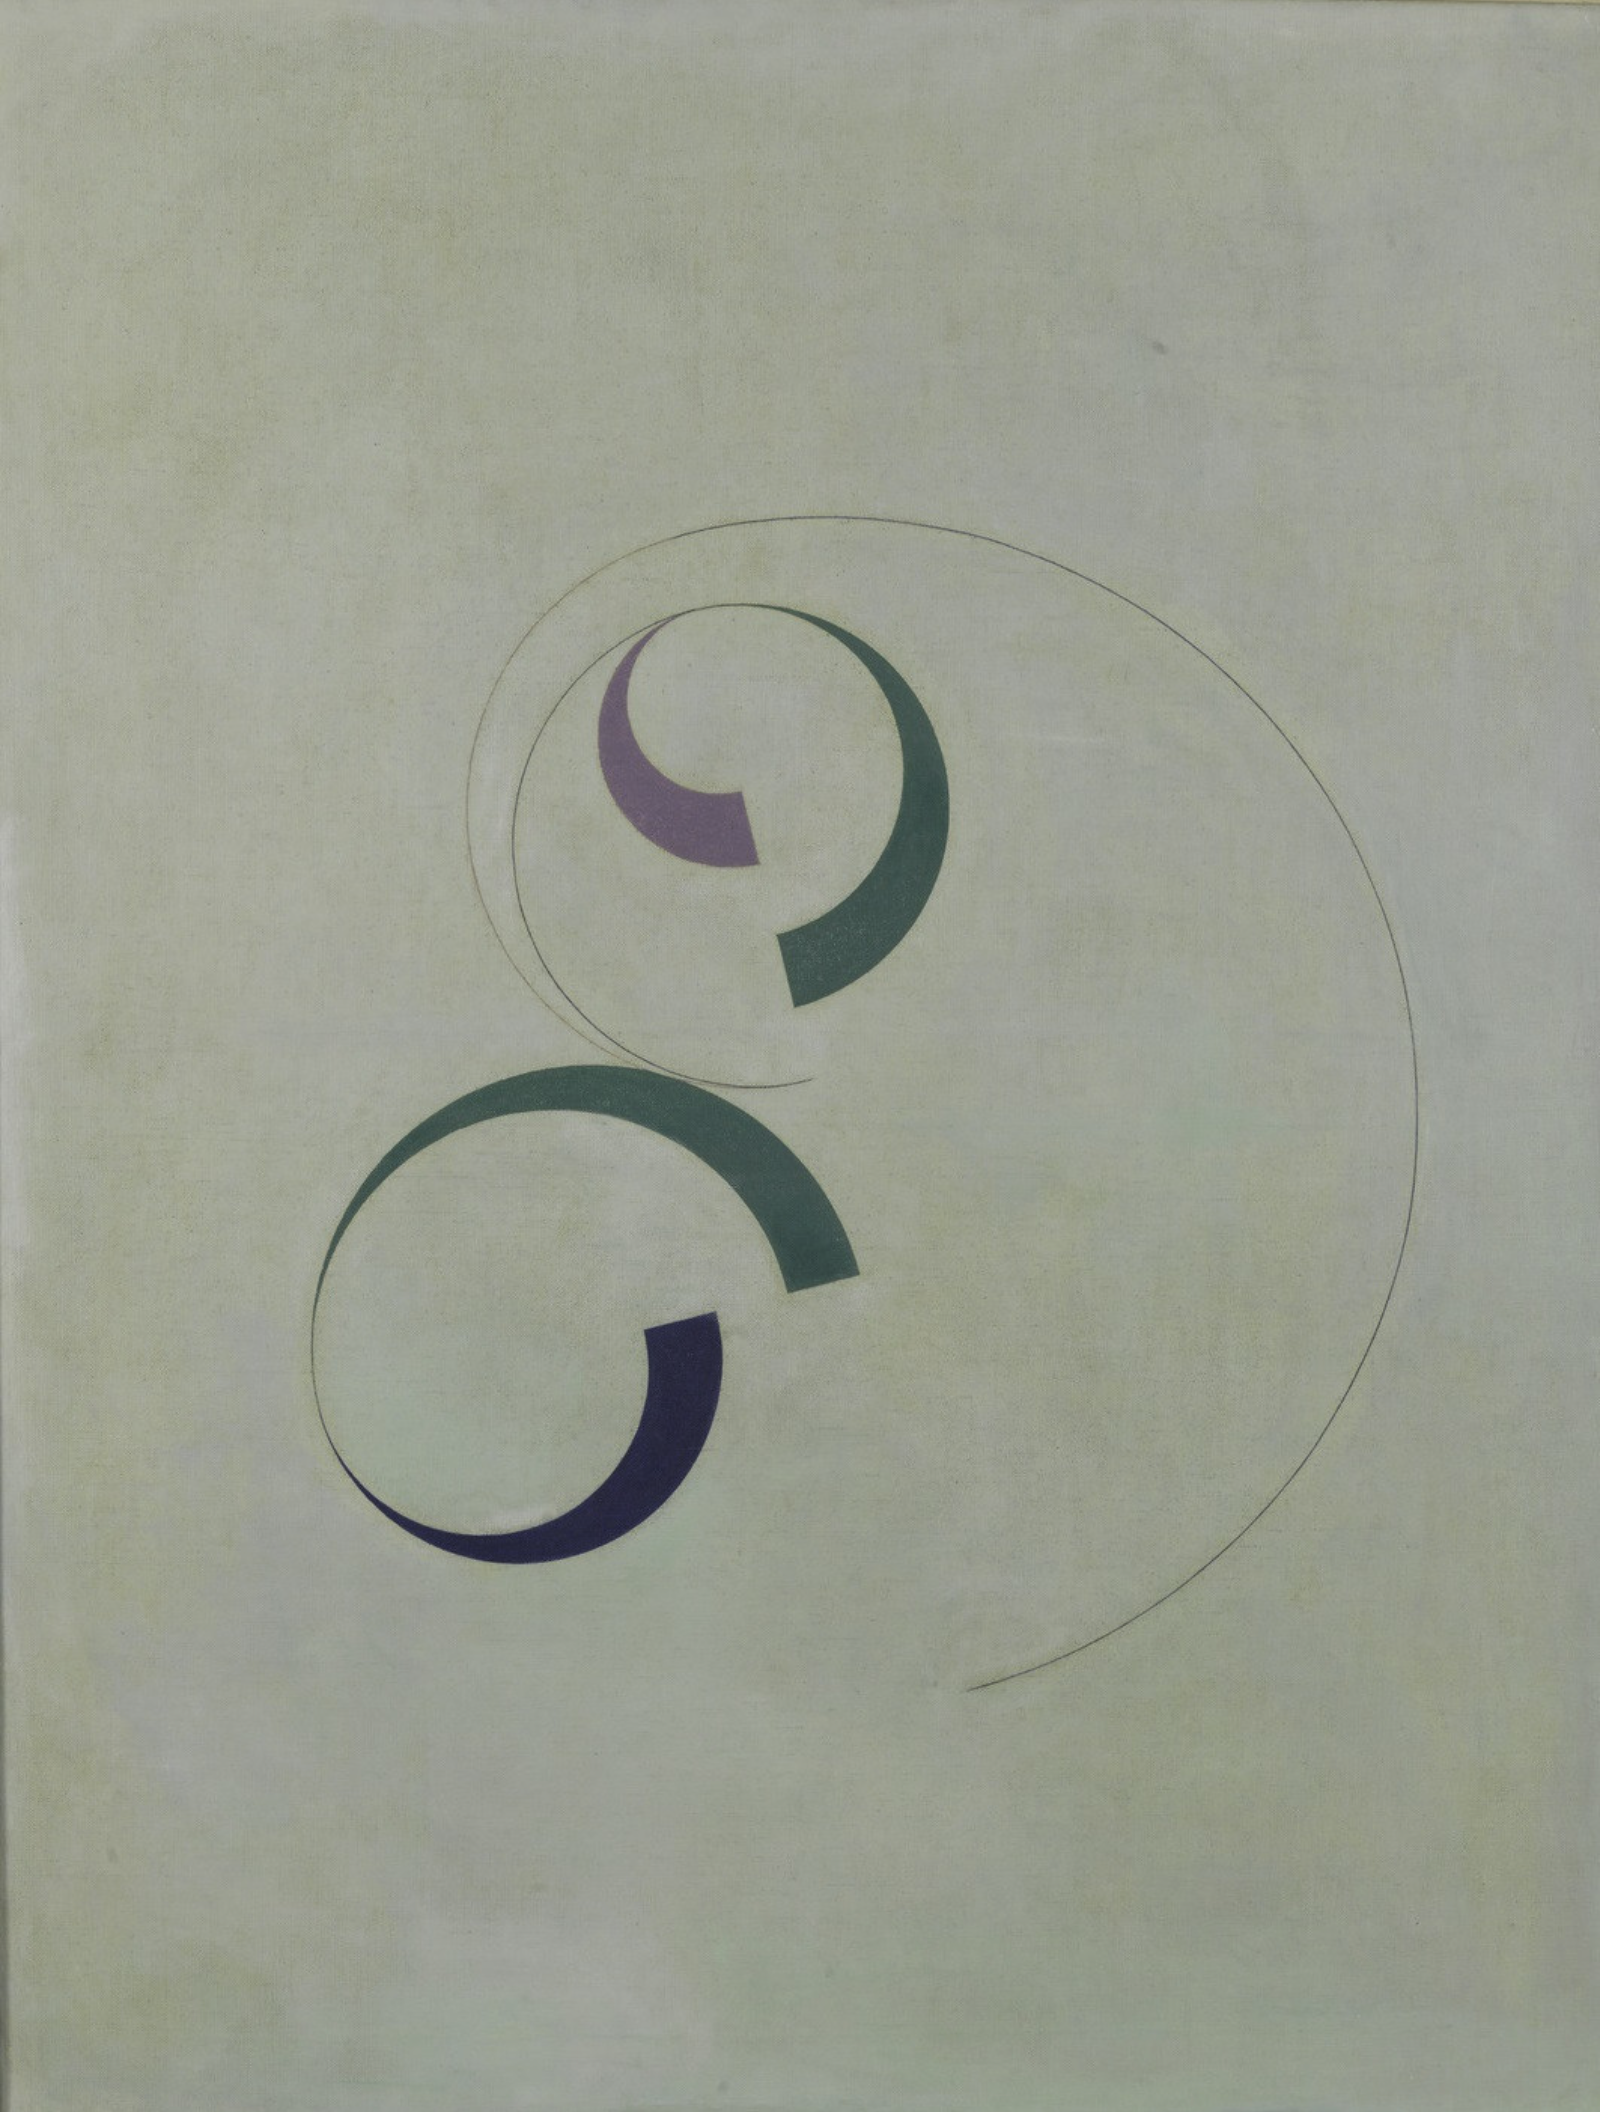 Abstract painting "Untitled" by Ivan Serpa, 1954, with elegant intertwining curves and circular segments in dark green and purple on a muted light green background, showcasing the expressive power of curvilinear composition.